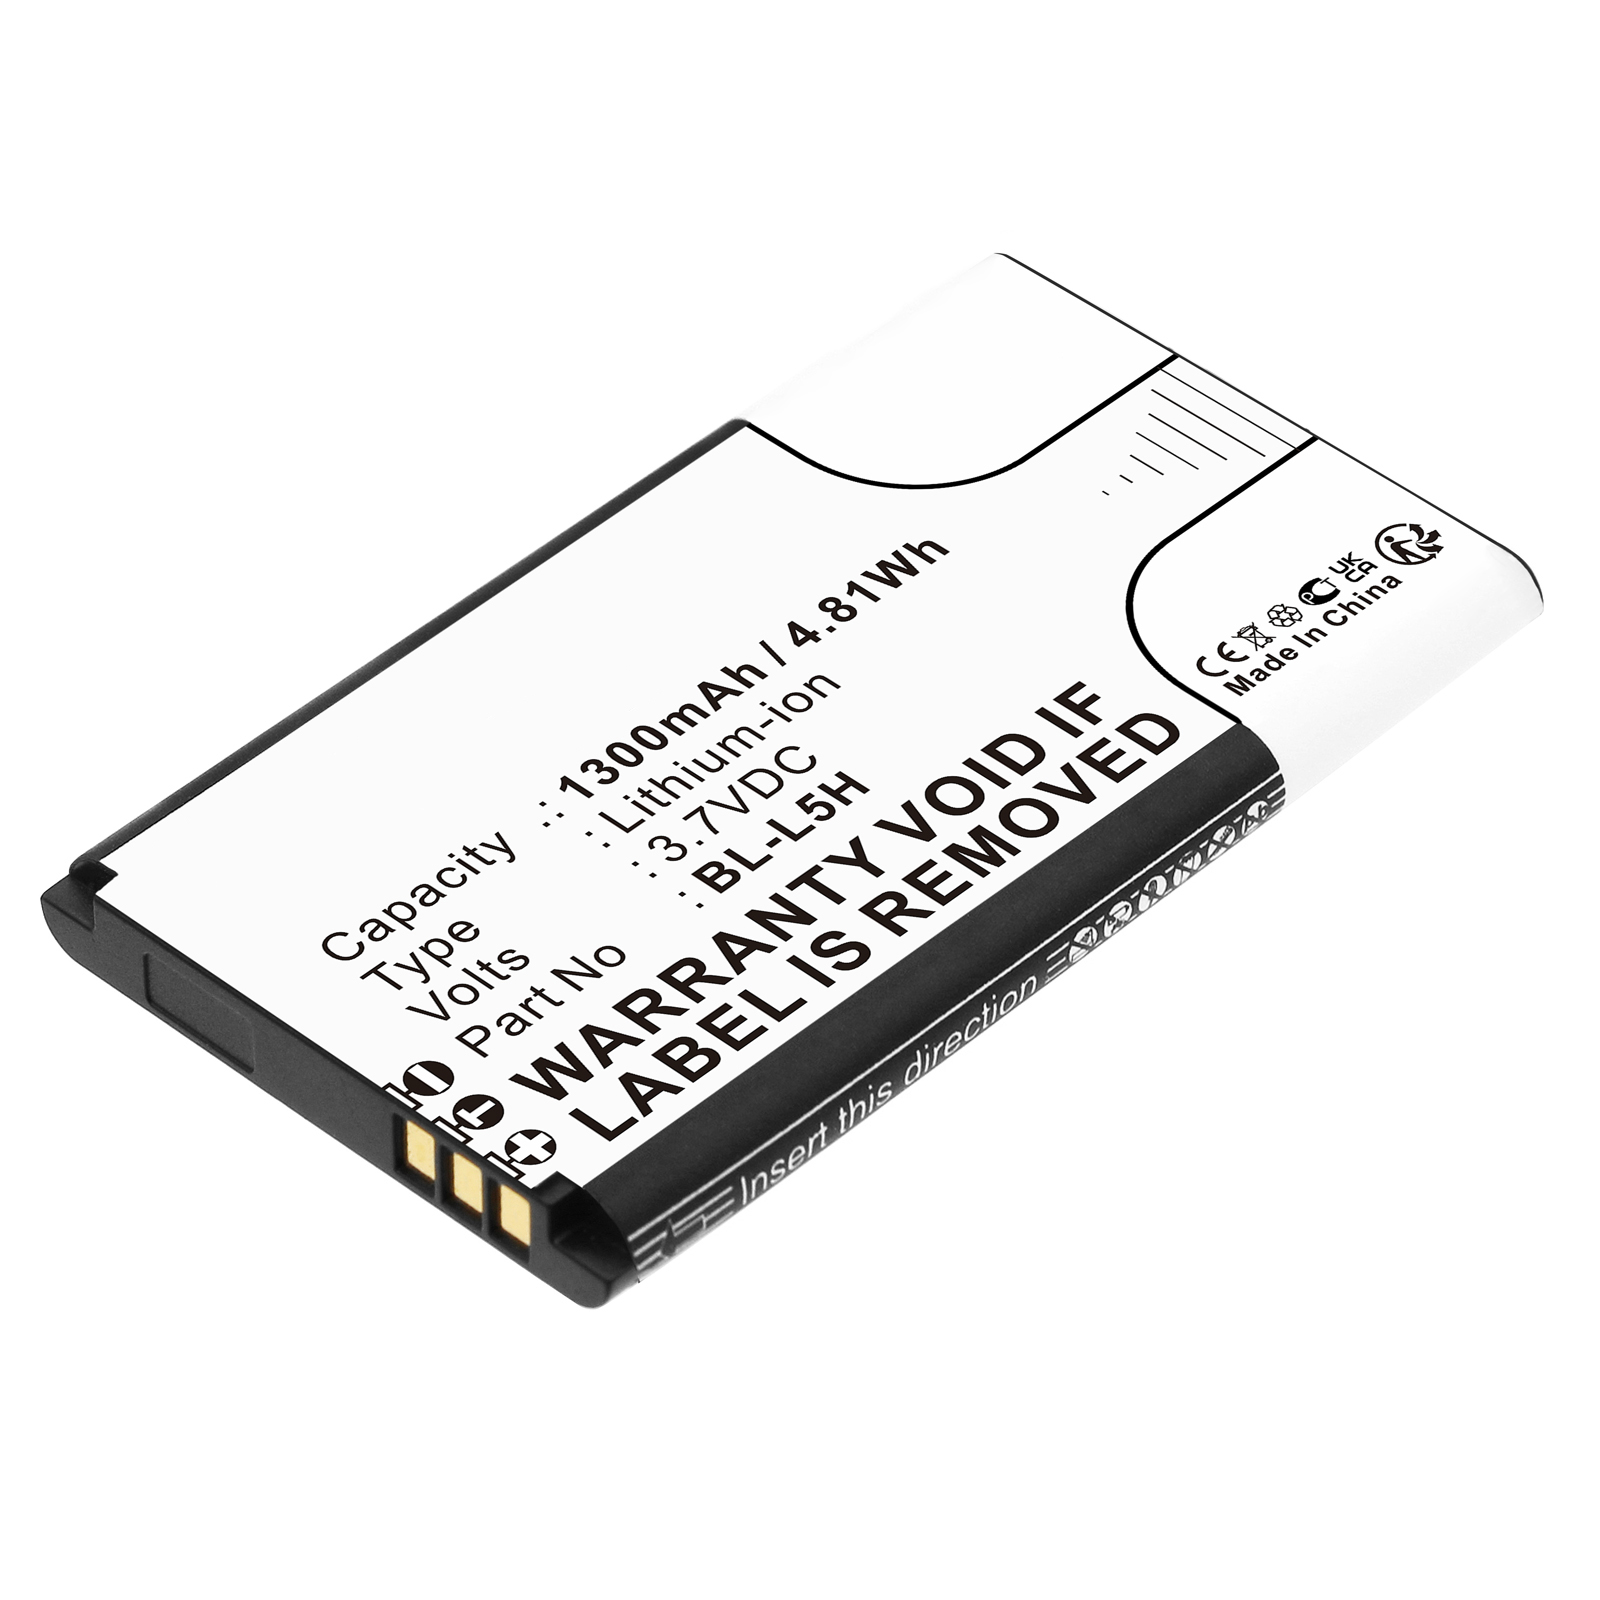 Synergy Digital Cell Phone Battery, Compatible with Nokia BL-L5H Cell Phone Battery (Li-ion, 3.7V, 1300mAh)